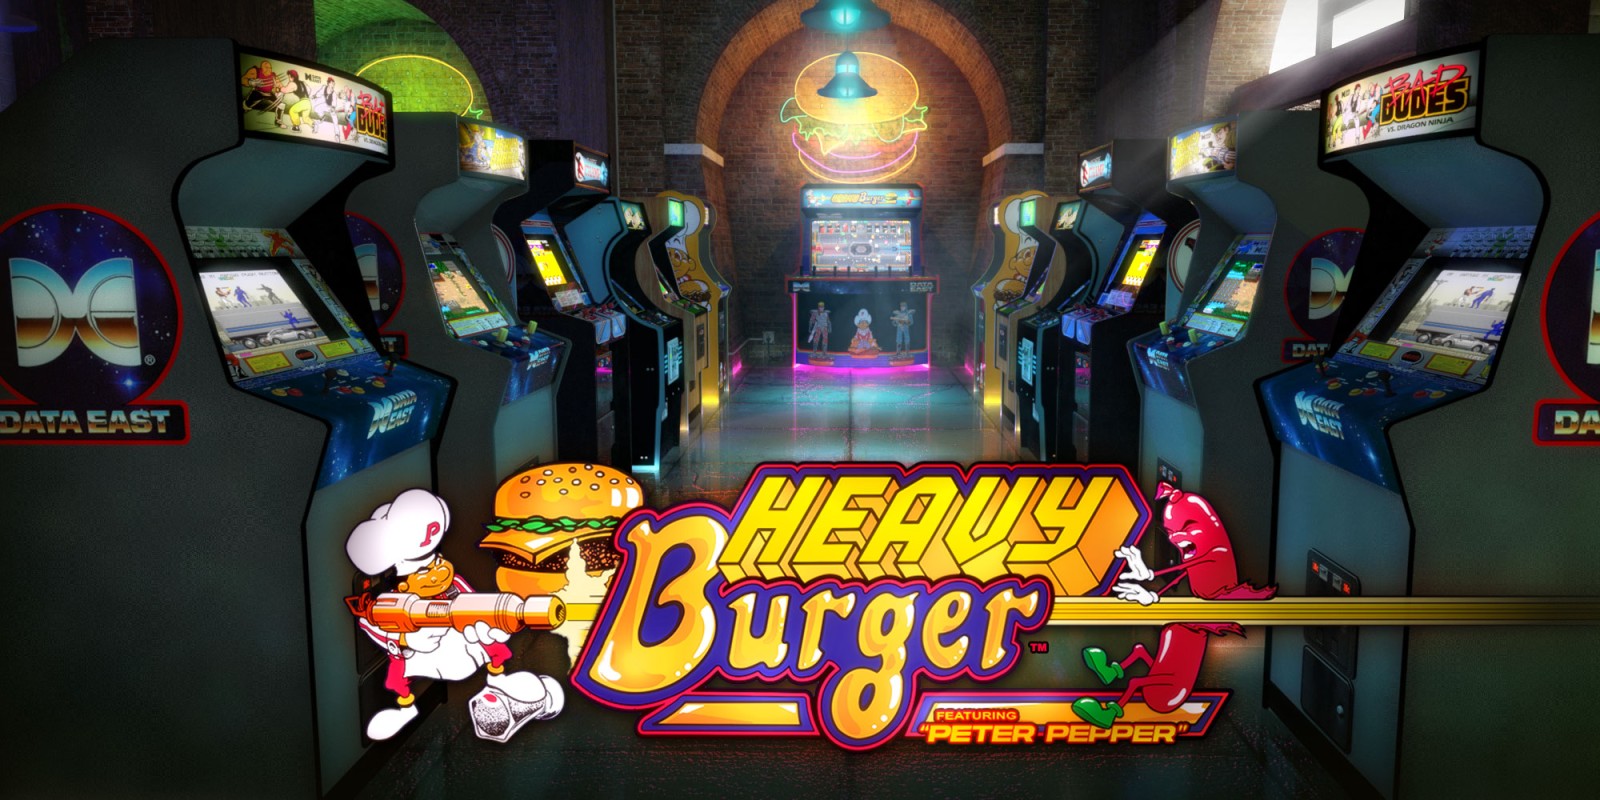 Last Game You Finished And Your Four-ghts - Page 39 H2x1_NSwitchDS_JohnnyTurbosArcadeHeavyBurger_image1600w